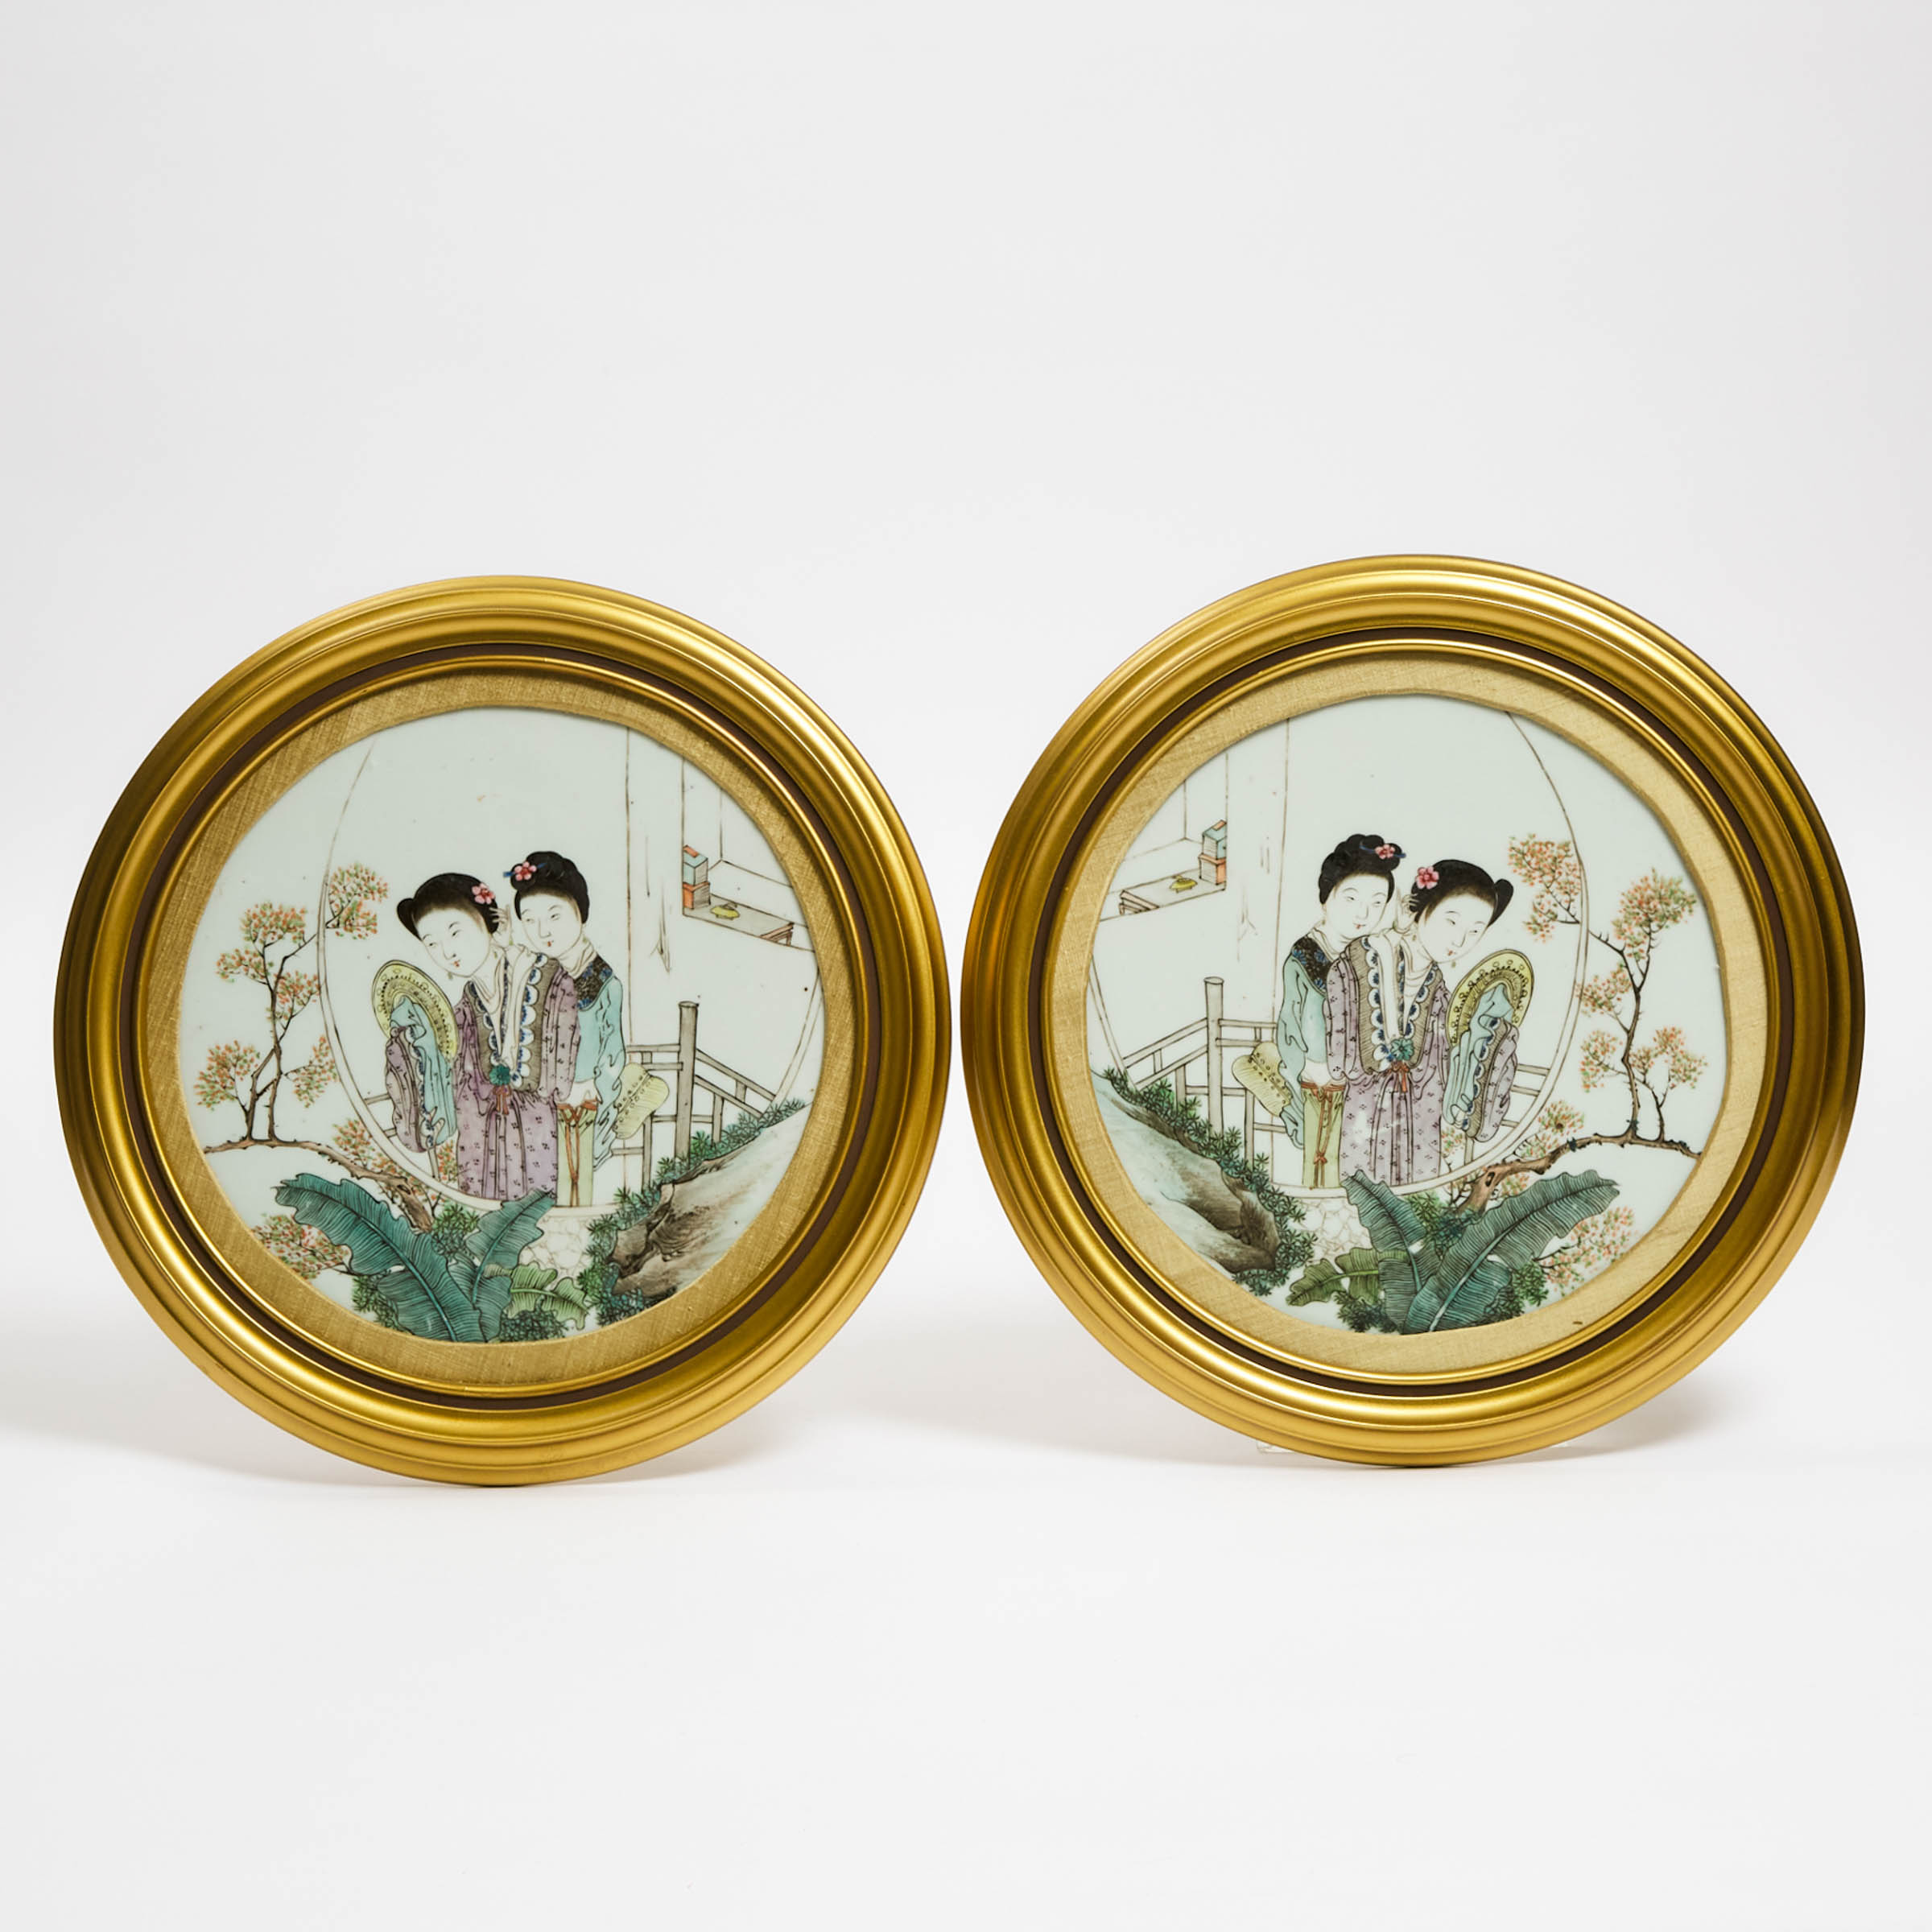 A Pair of Qianjiang Enameled 'Ladies' Porcelain Plaques, Republican Period (1912-1949)